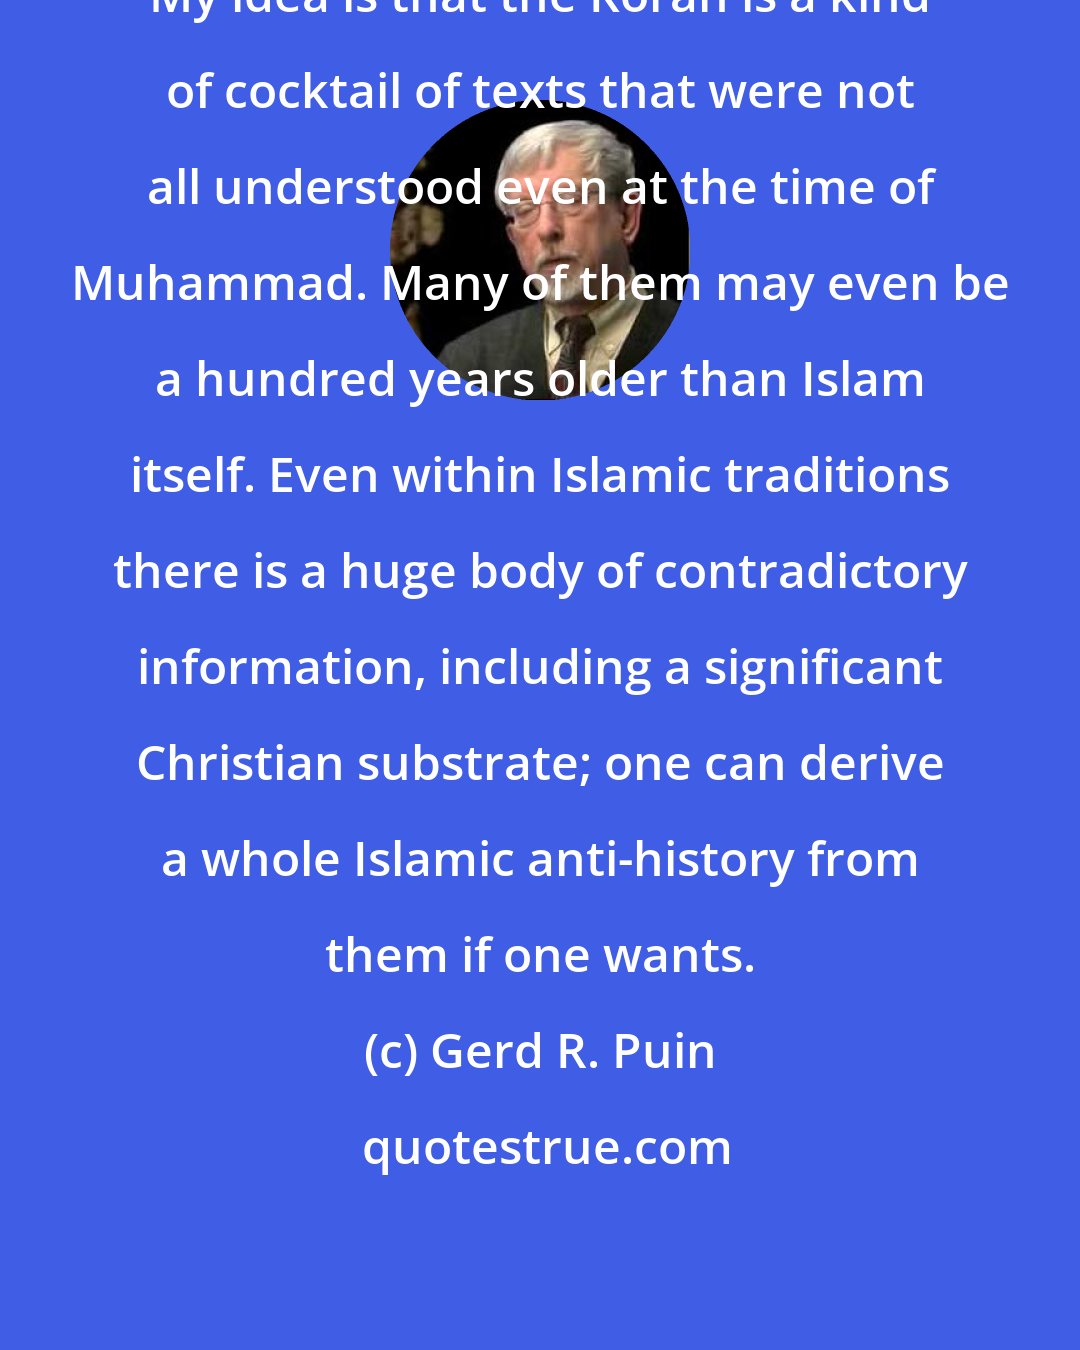 Gerd R. Puin: My idea is that the Koran is a kind of cocktail of texts that were not all understood even at the time of Muhammad. Many of them may even be a hundred years older than Islam itself. Even within Islamic traditions there is a huge body of contradictory information, including a significant Christian substrate; one can derive a whole Islamic anti-history from them if one wants.